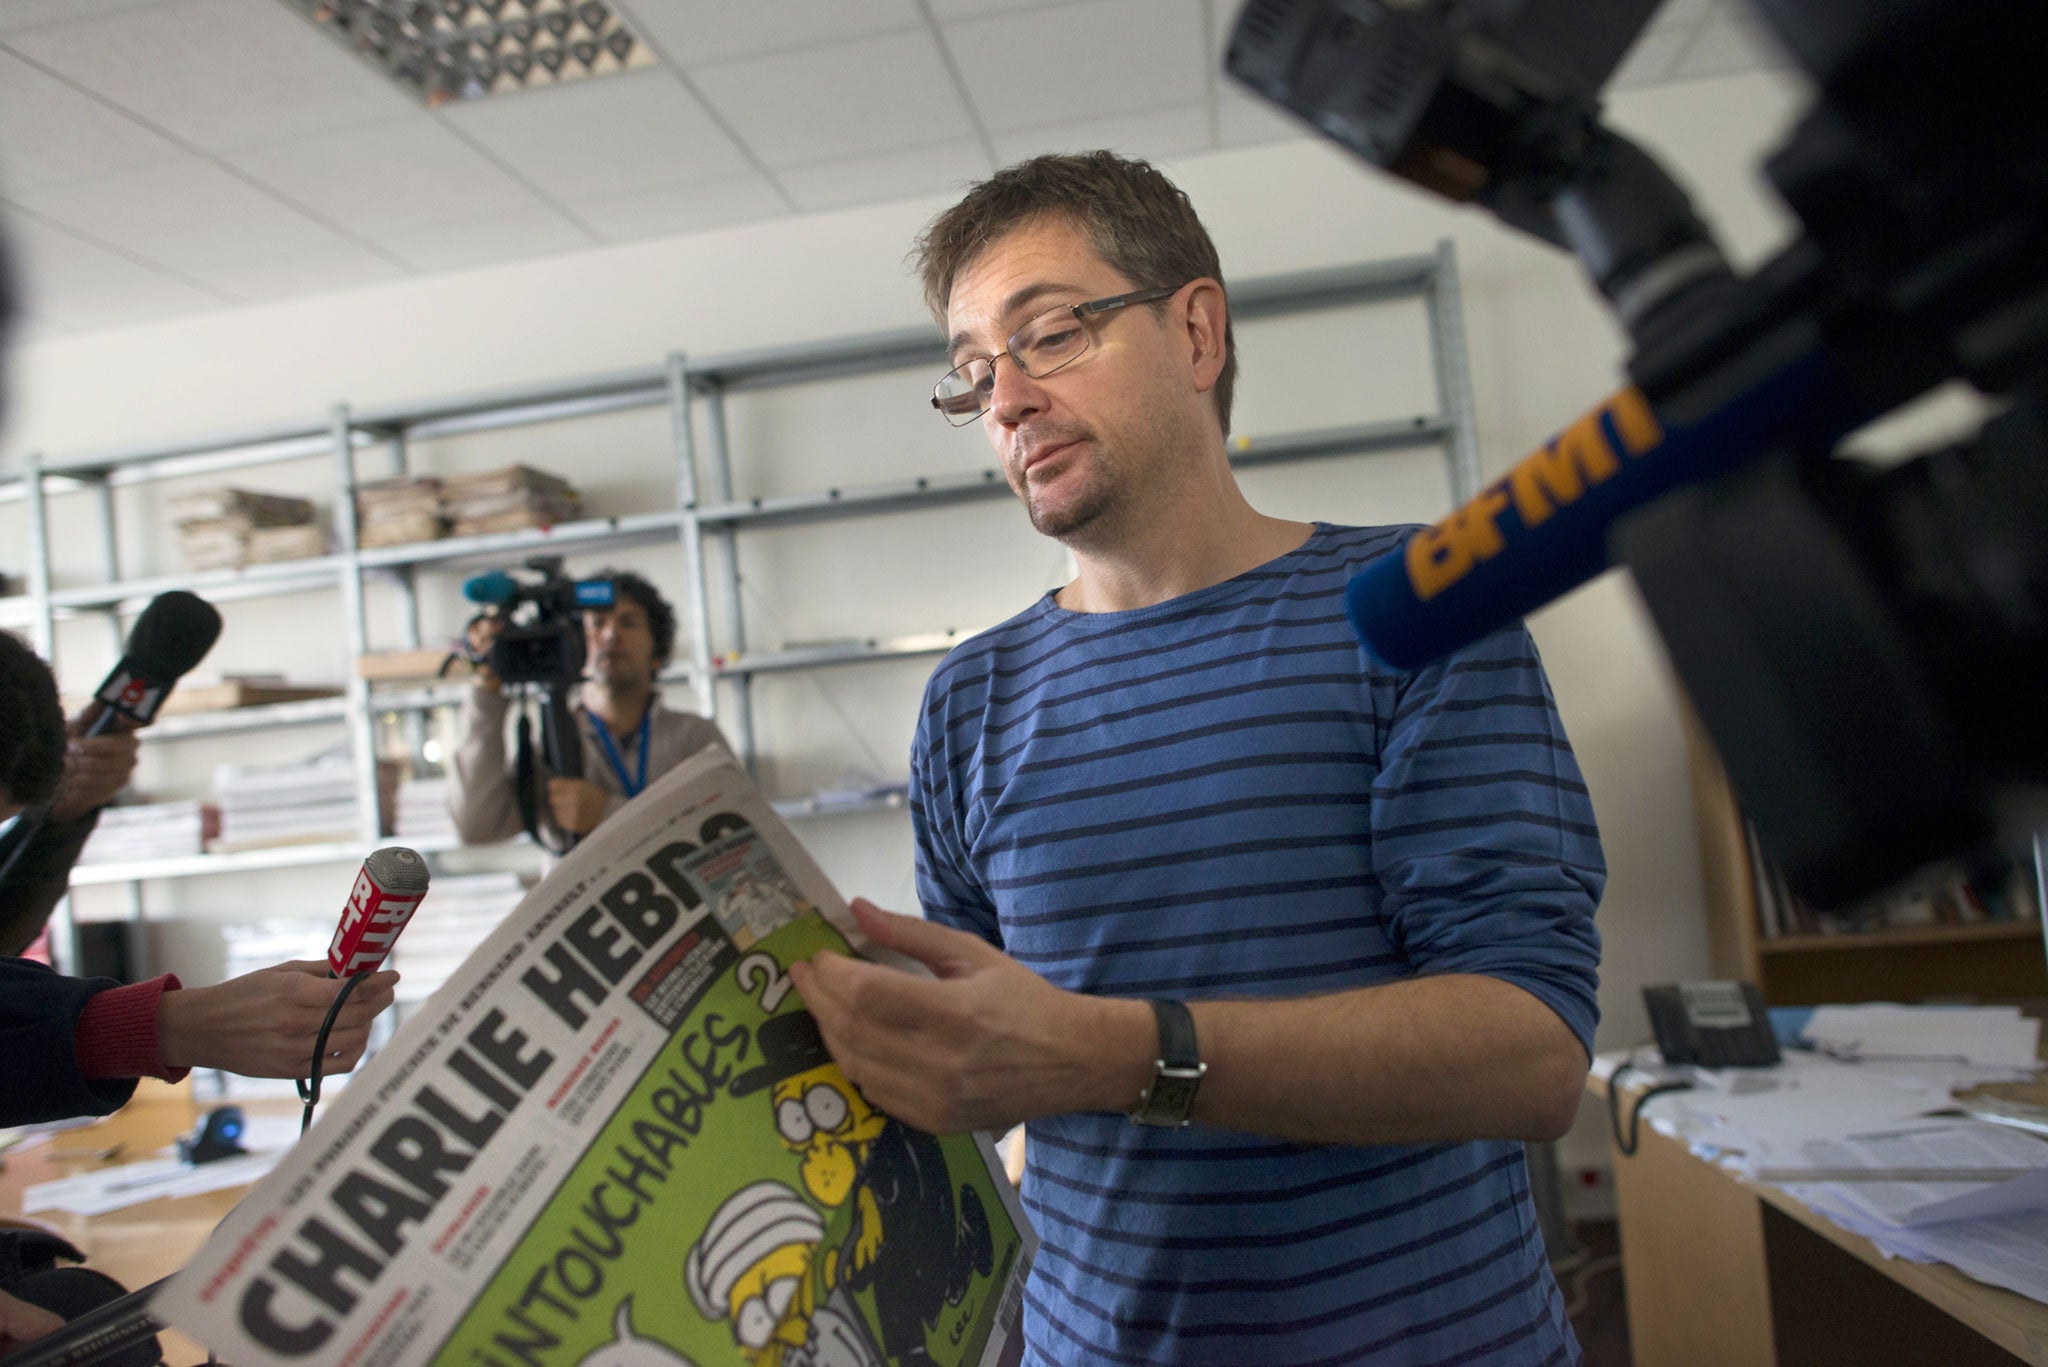 French satirical weekly Charlie Hebdo's publisher, Stéphane Charbonnier, known as Charb, at the magazine's headquarters in Paris on 19 September 2012.